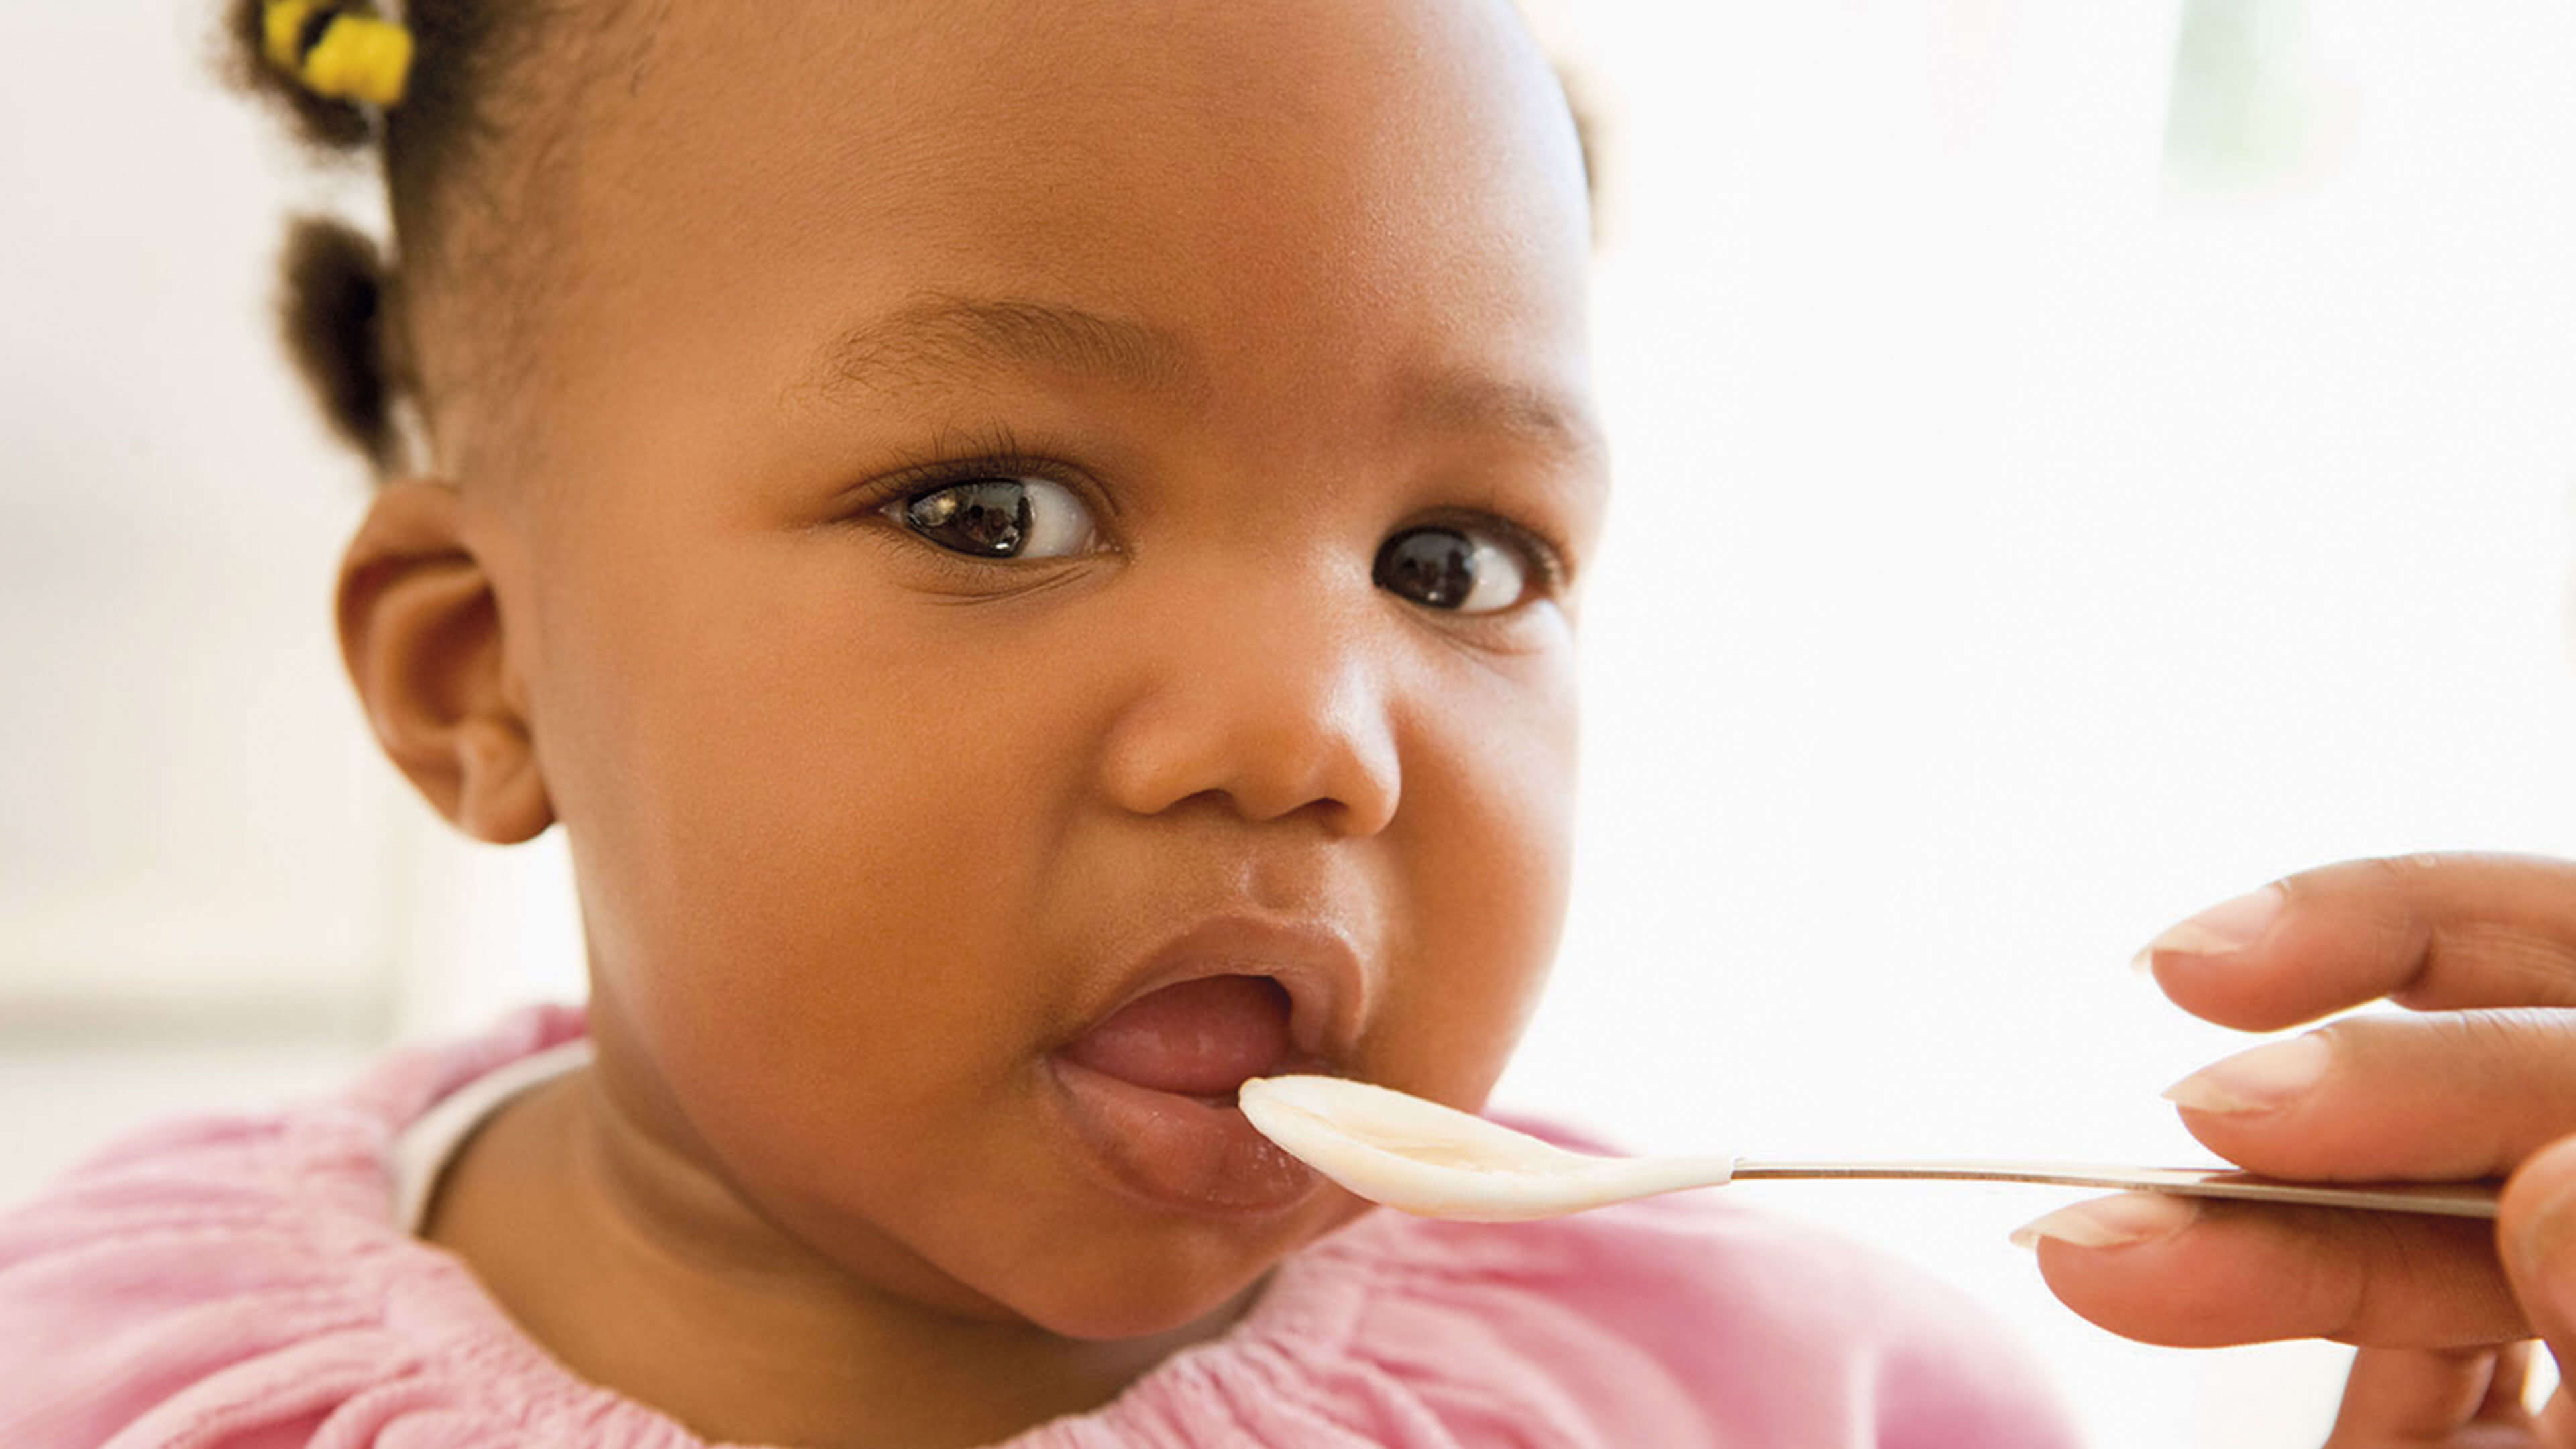 Infant Mixed Cereal Food Production: https://www.mamanatural.com